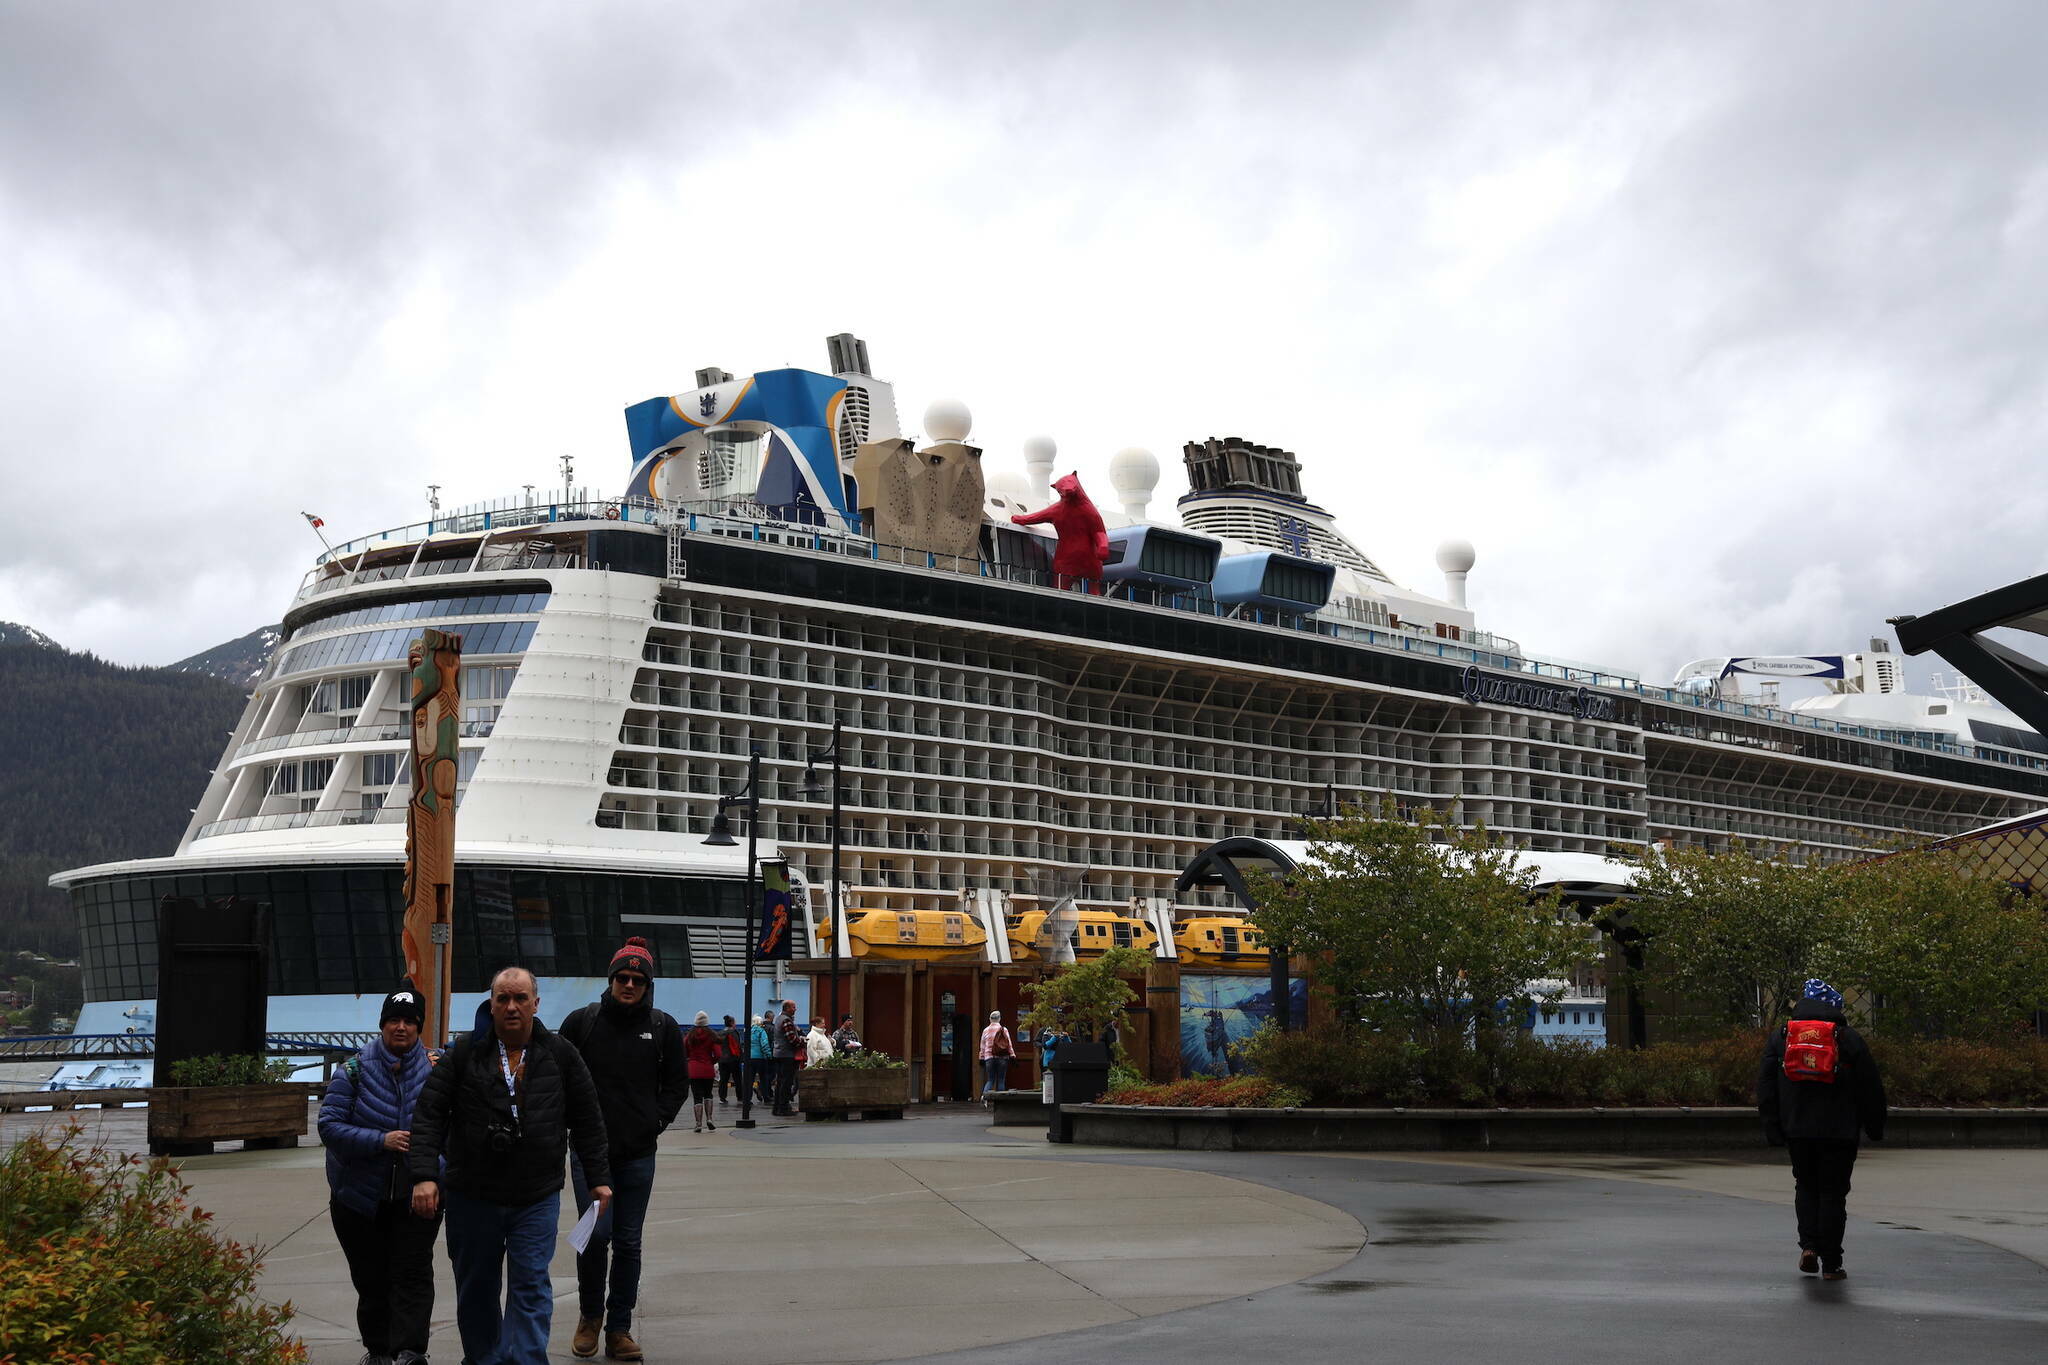 Cruise ship passengers walk around in downtown Juneau in late May. (Clarise Larson / Juneau Empire file photo)